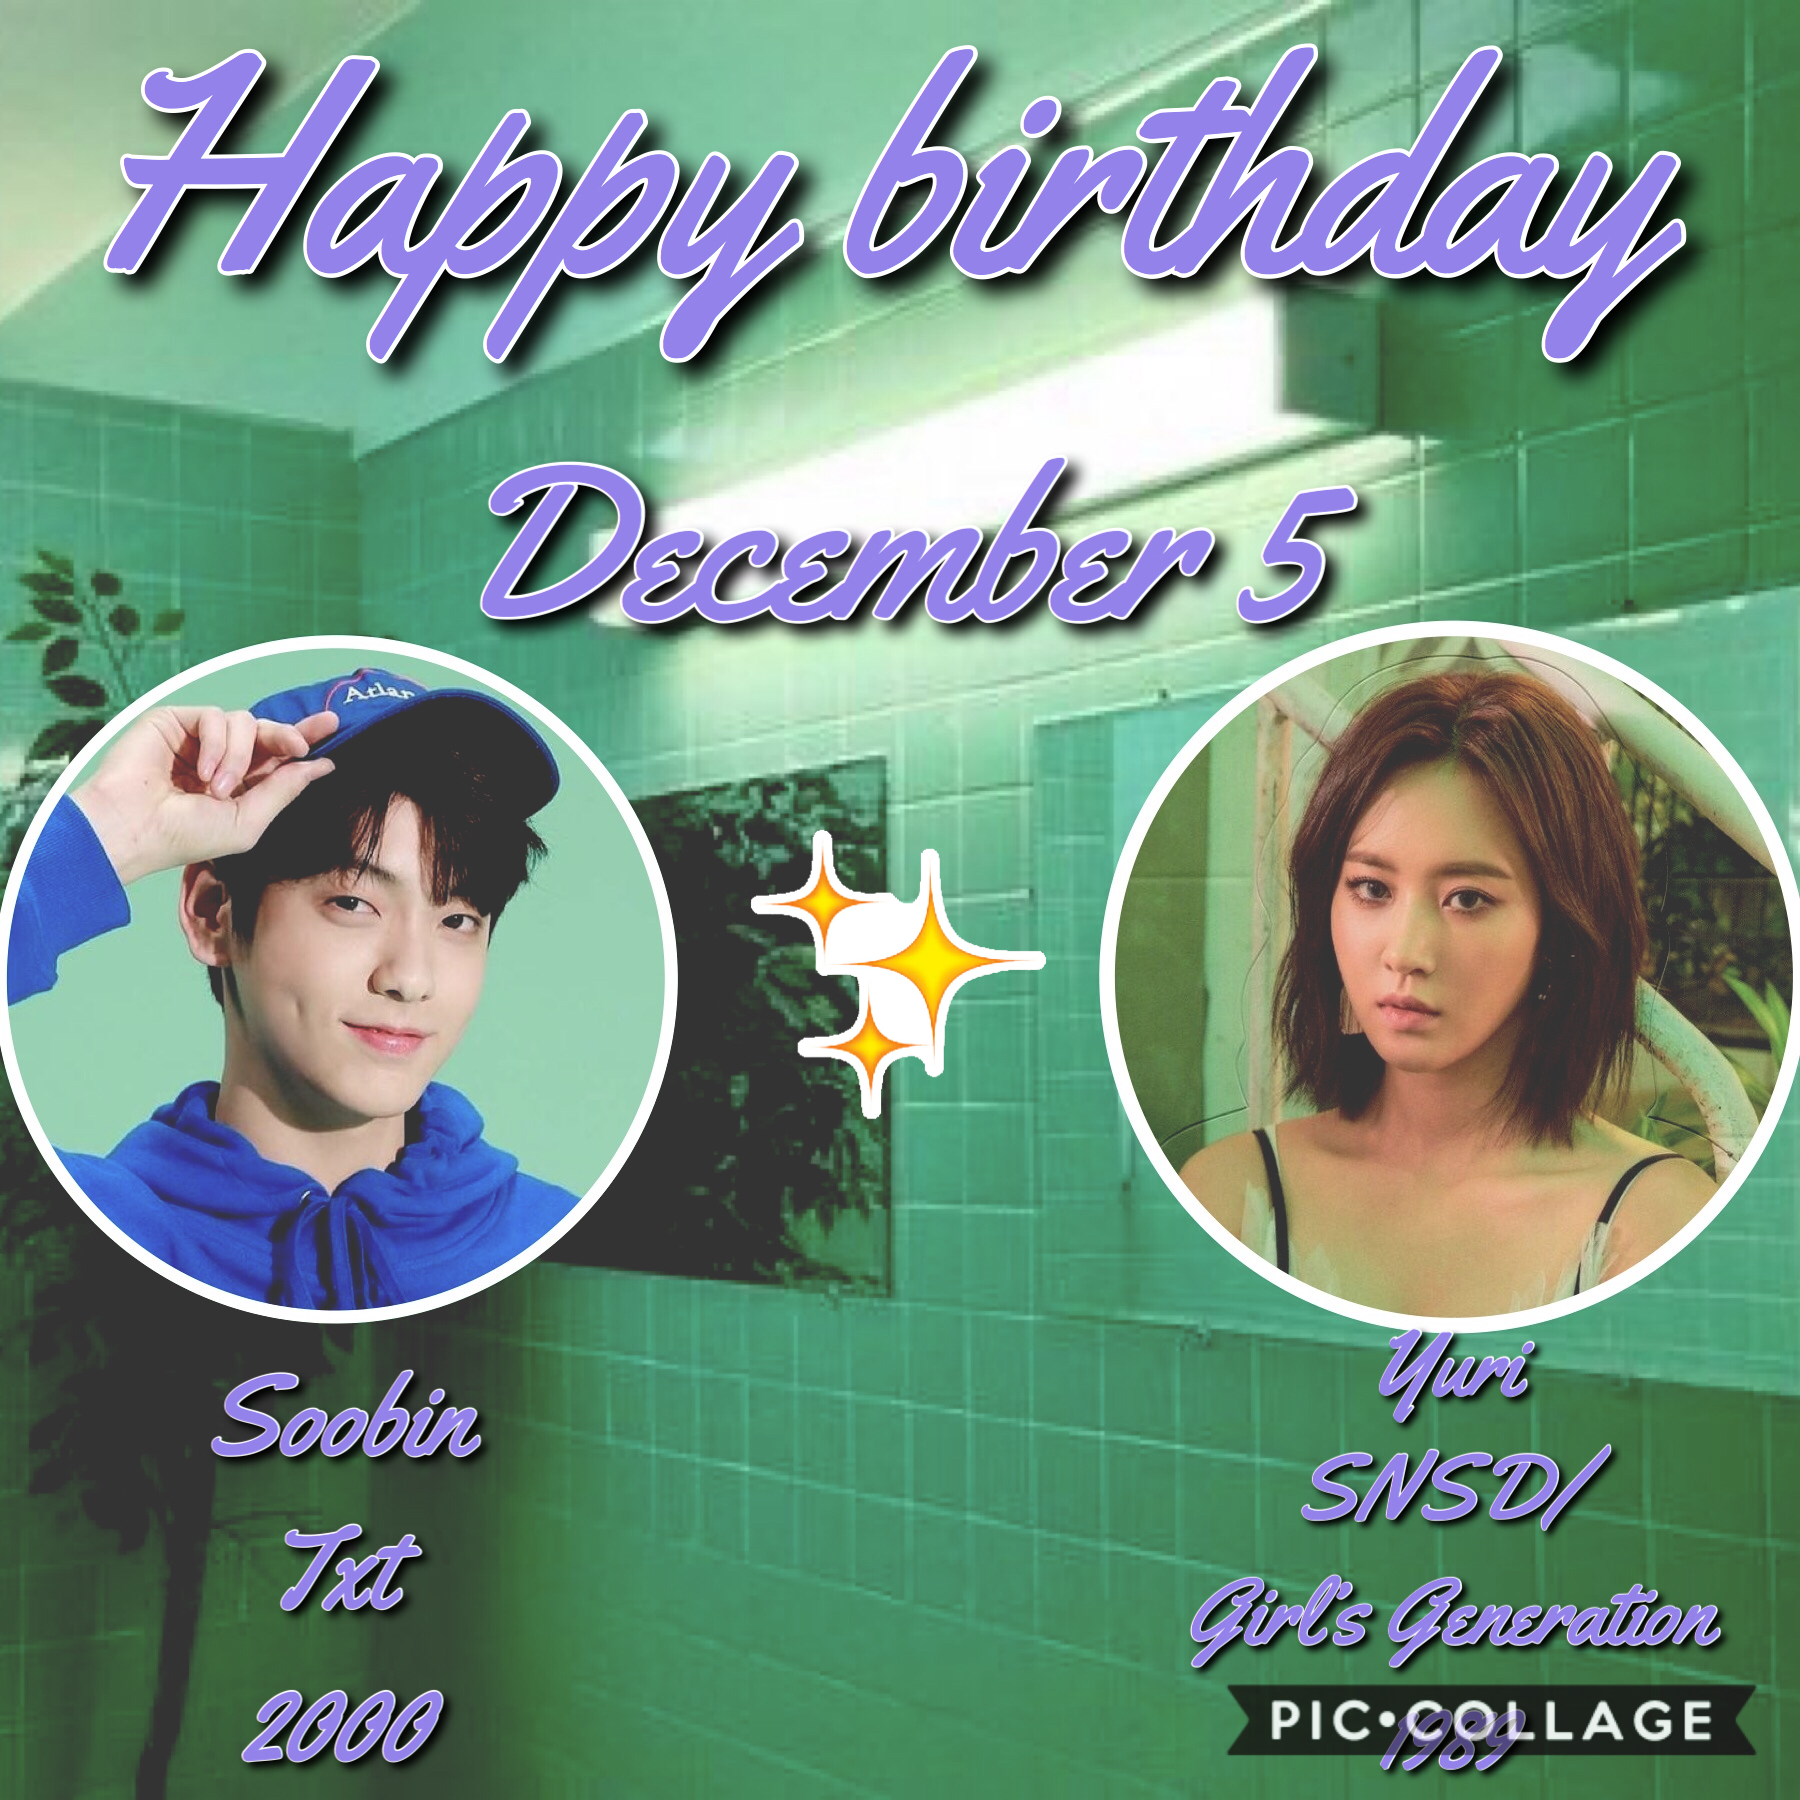 •🎈🍂•
I can’t believe that Soobin is 19 and that Yuri is 30! Wow happy birthday:)
🍁🍂~Whoop~🍂🍁